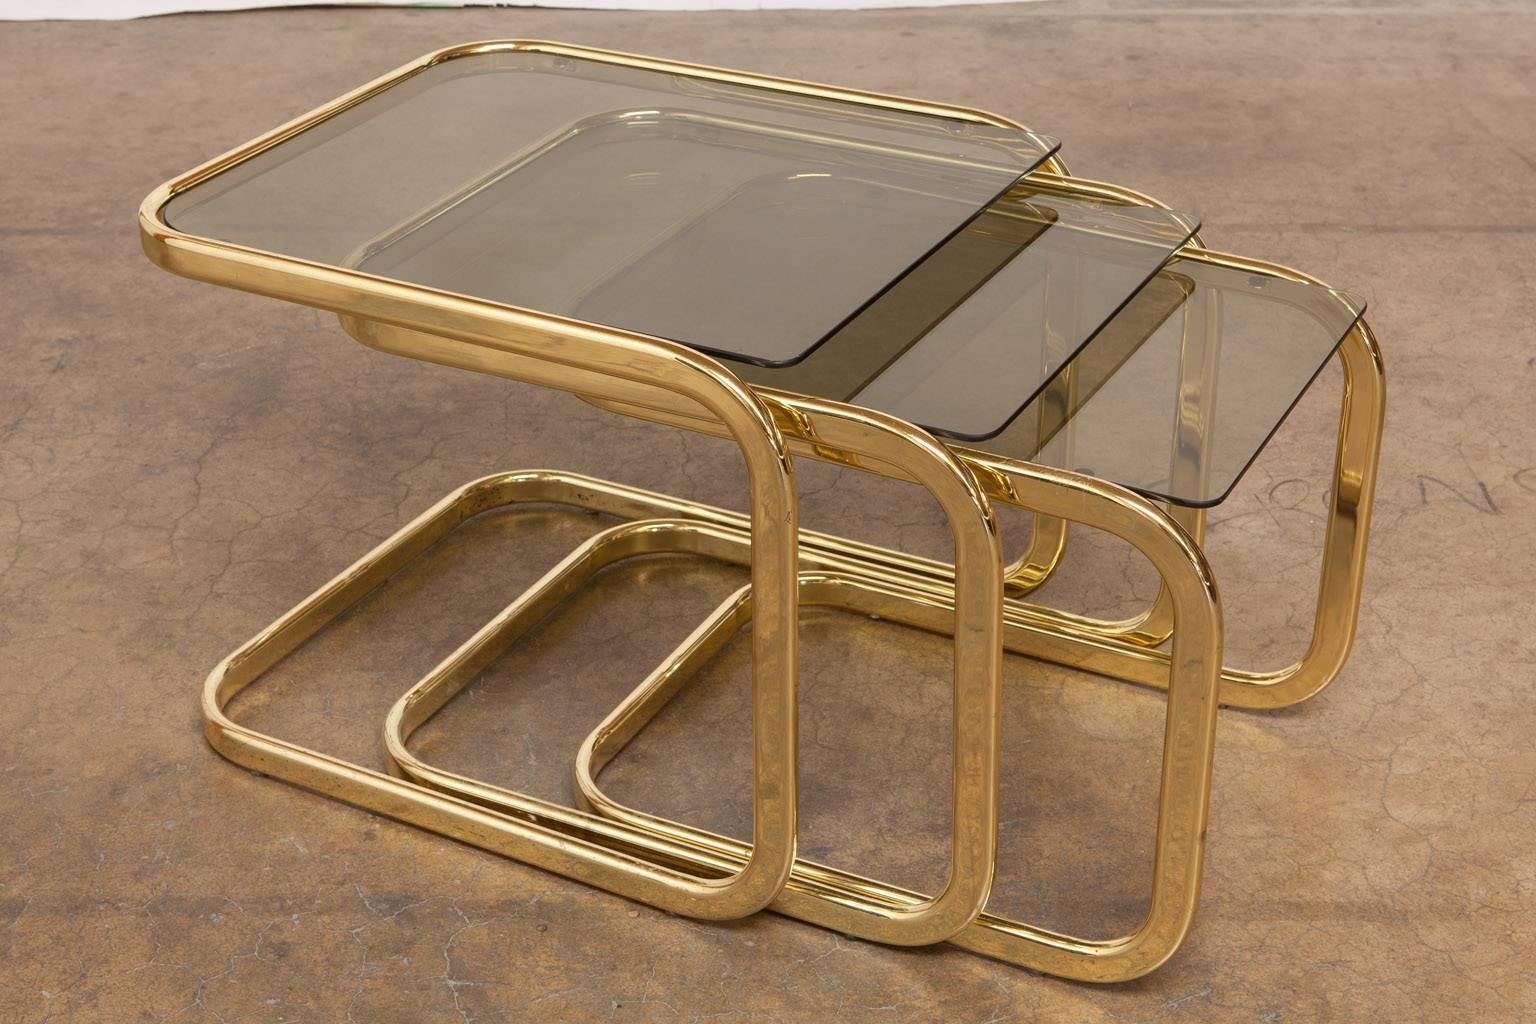 Striking set of three brass and smoked glass nesting tables attributed to Milo Baughman for DIA. Constructed from brass plated steel with smooth, sleek frames and each featuring a plate of dark tinted glass. Classic Mid-Century design excited in a